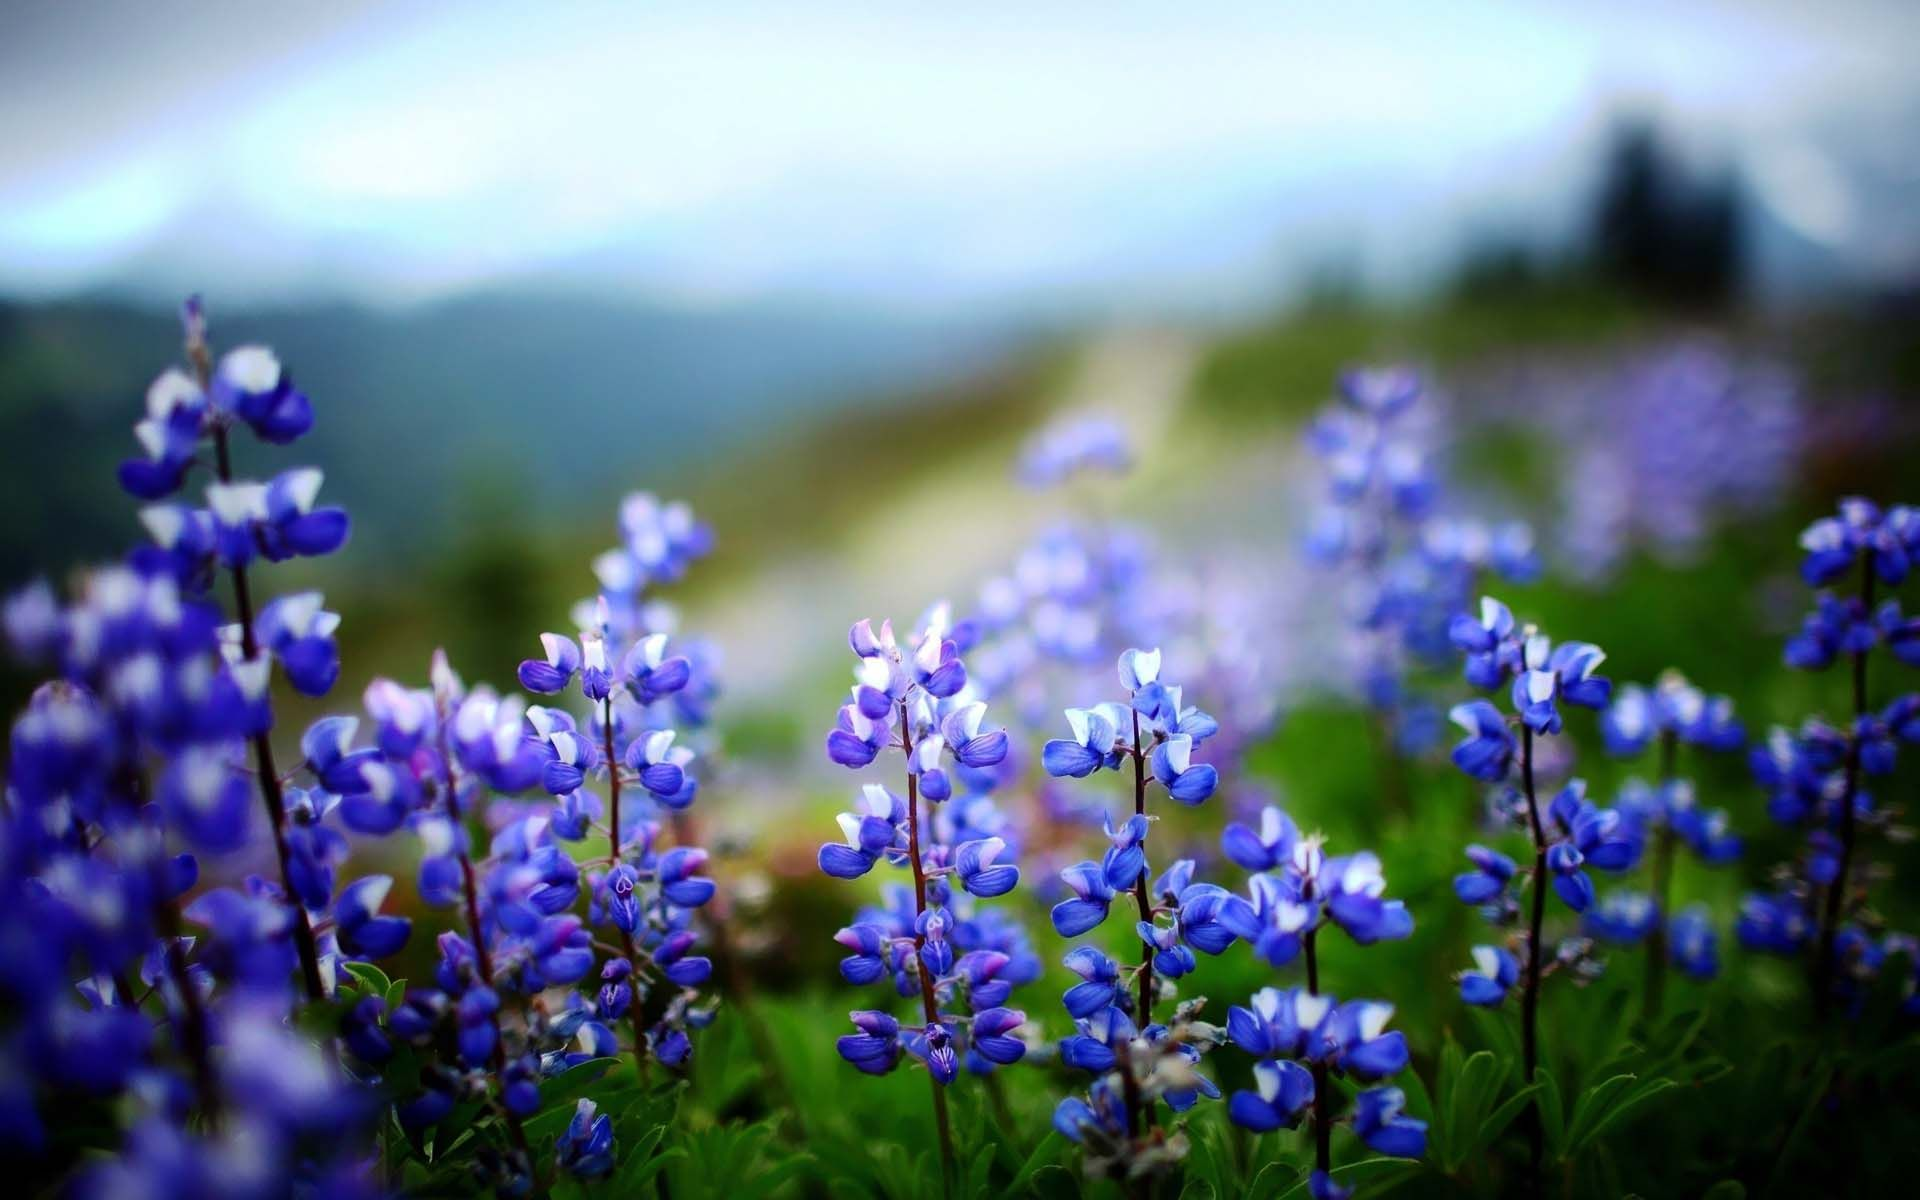 Lupines. HD Flowers Wallpaper for Mobile and Desktop. Lupine